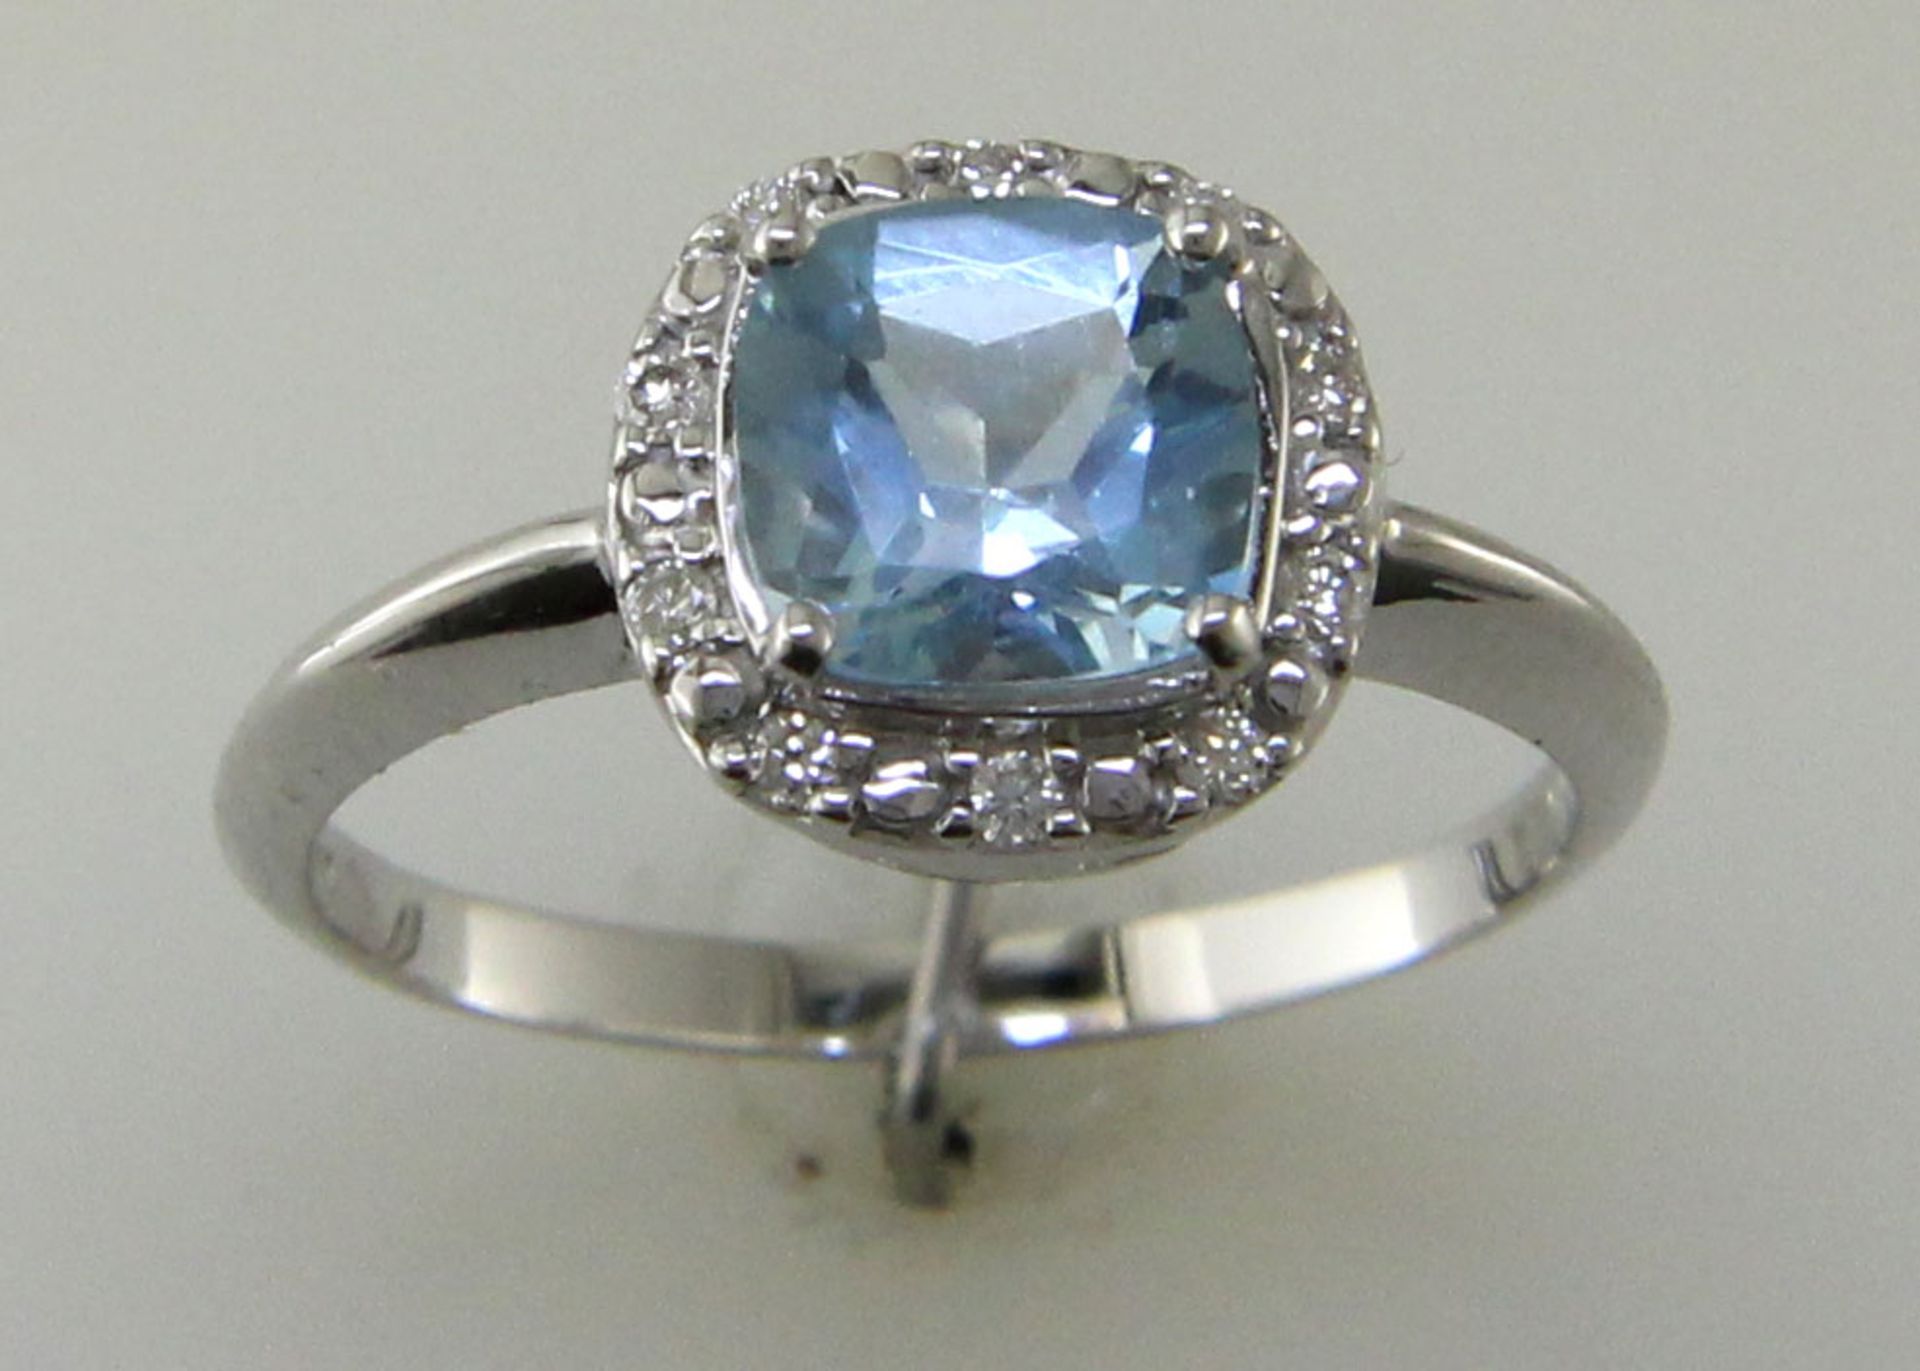 9ct White Gold Diamond And Blue Topaz Ring (BT1.79) 0.10 Carats - Valued By GIE £1,920.00 - A - Image 9 of 10